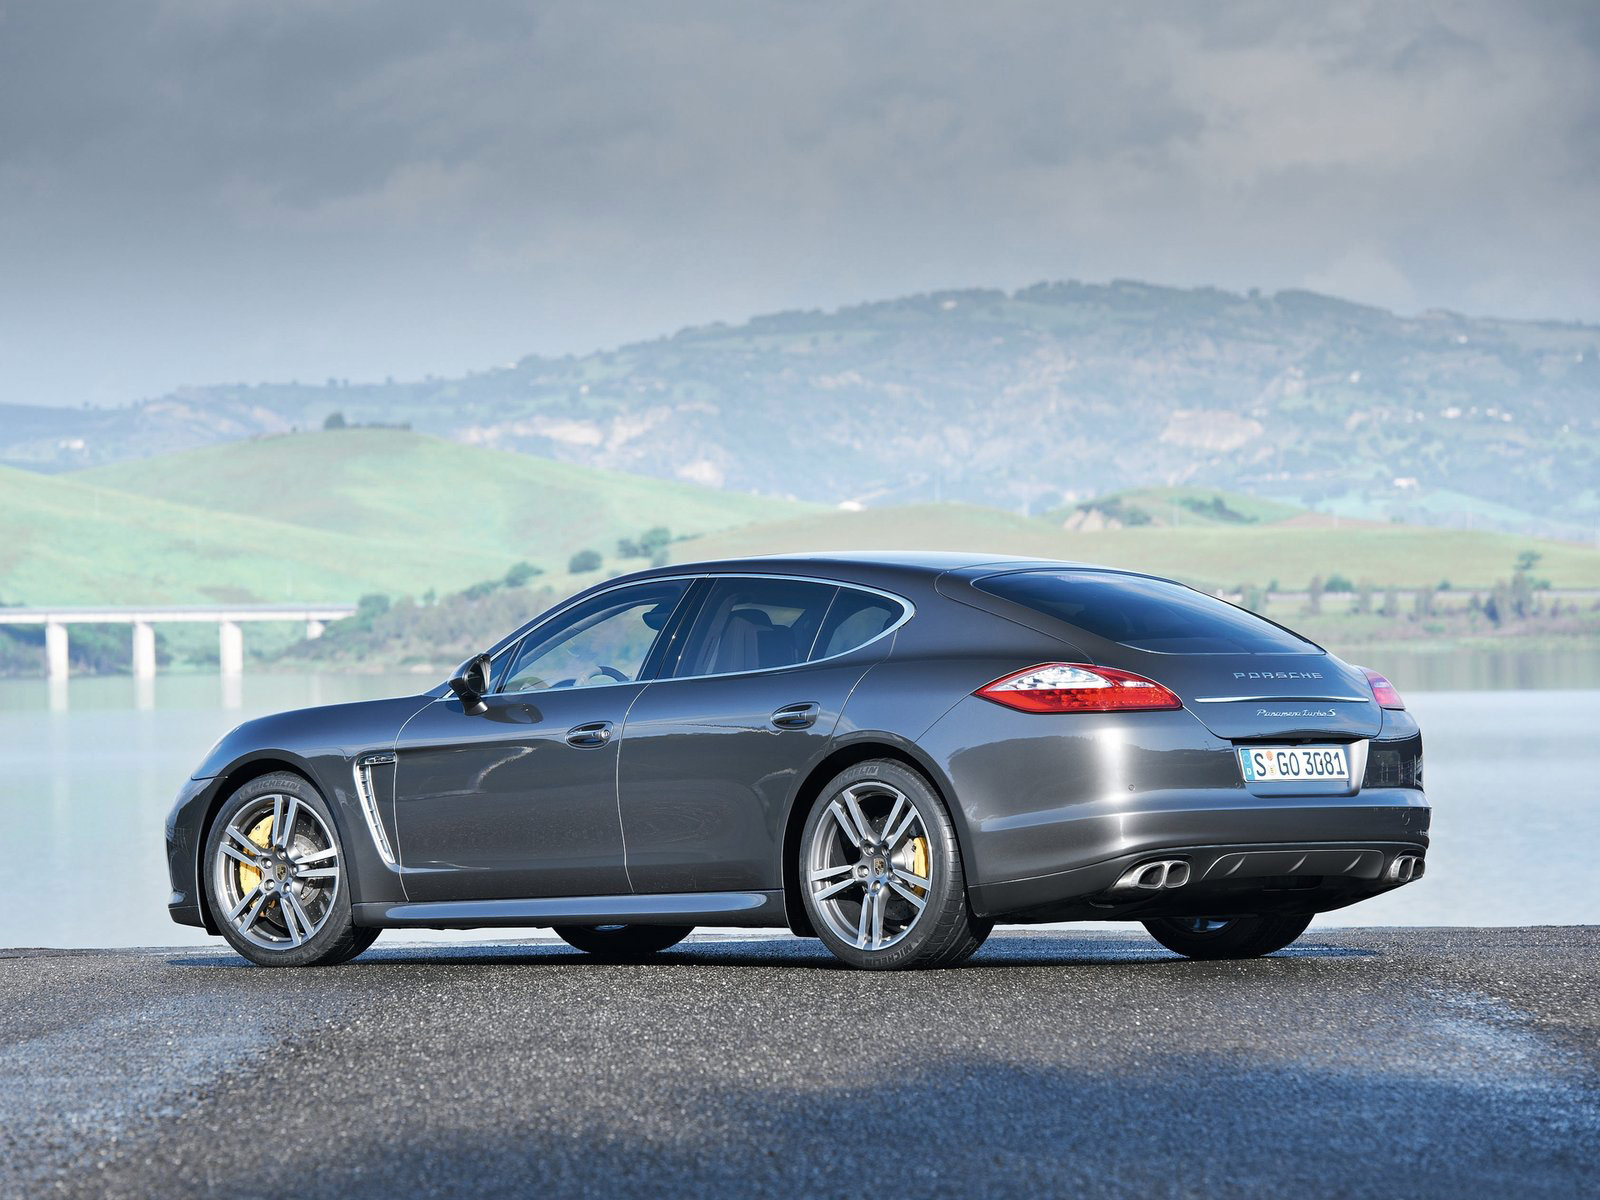 2012 PORSCHE Panamera Turbo S pictures, specifications